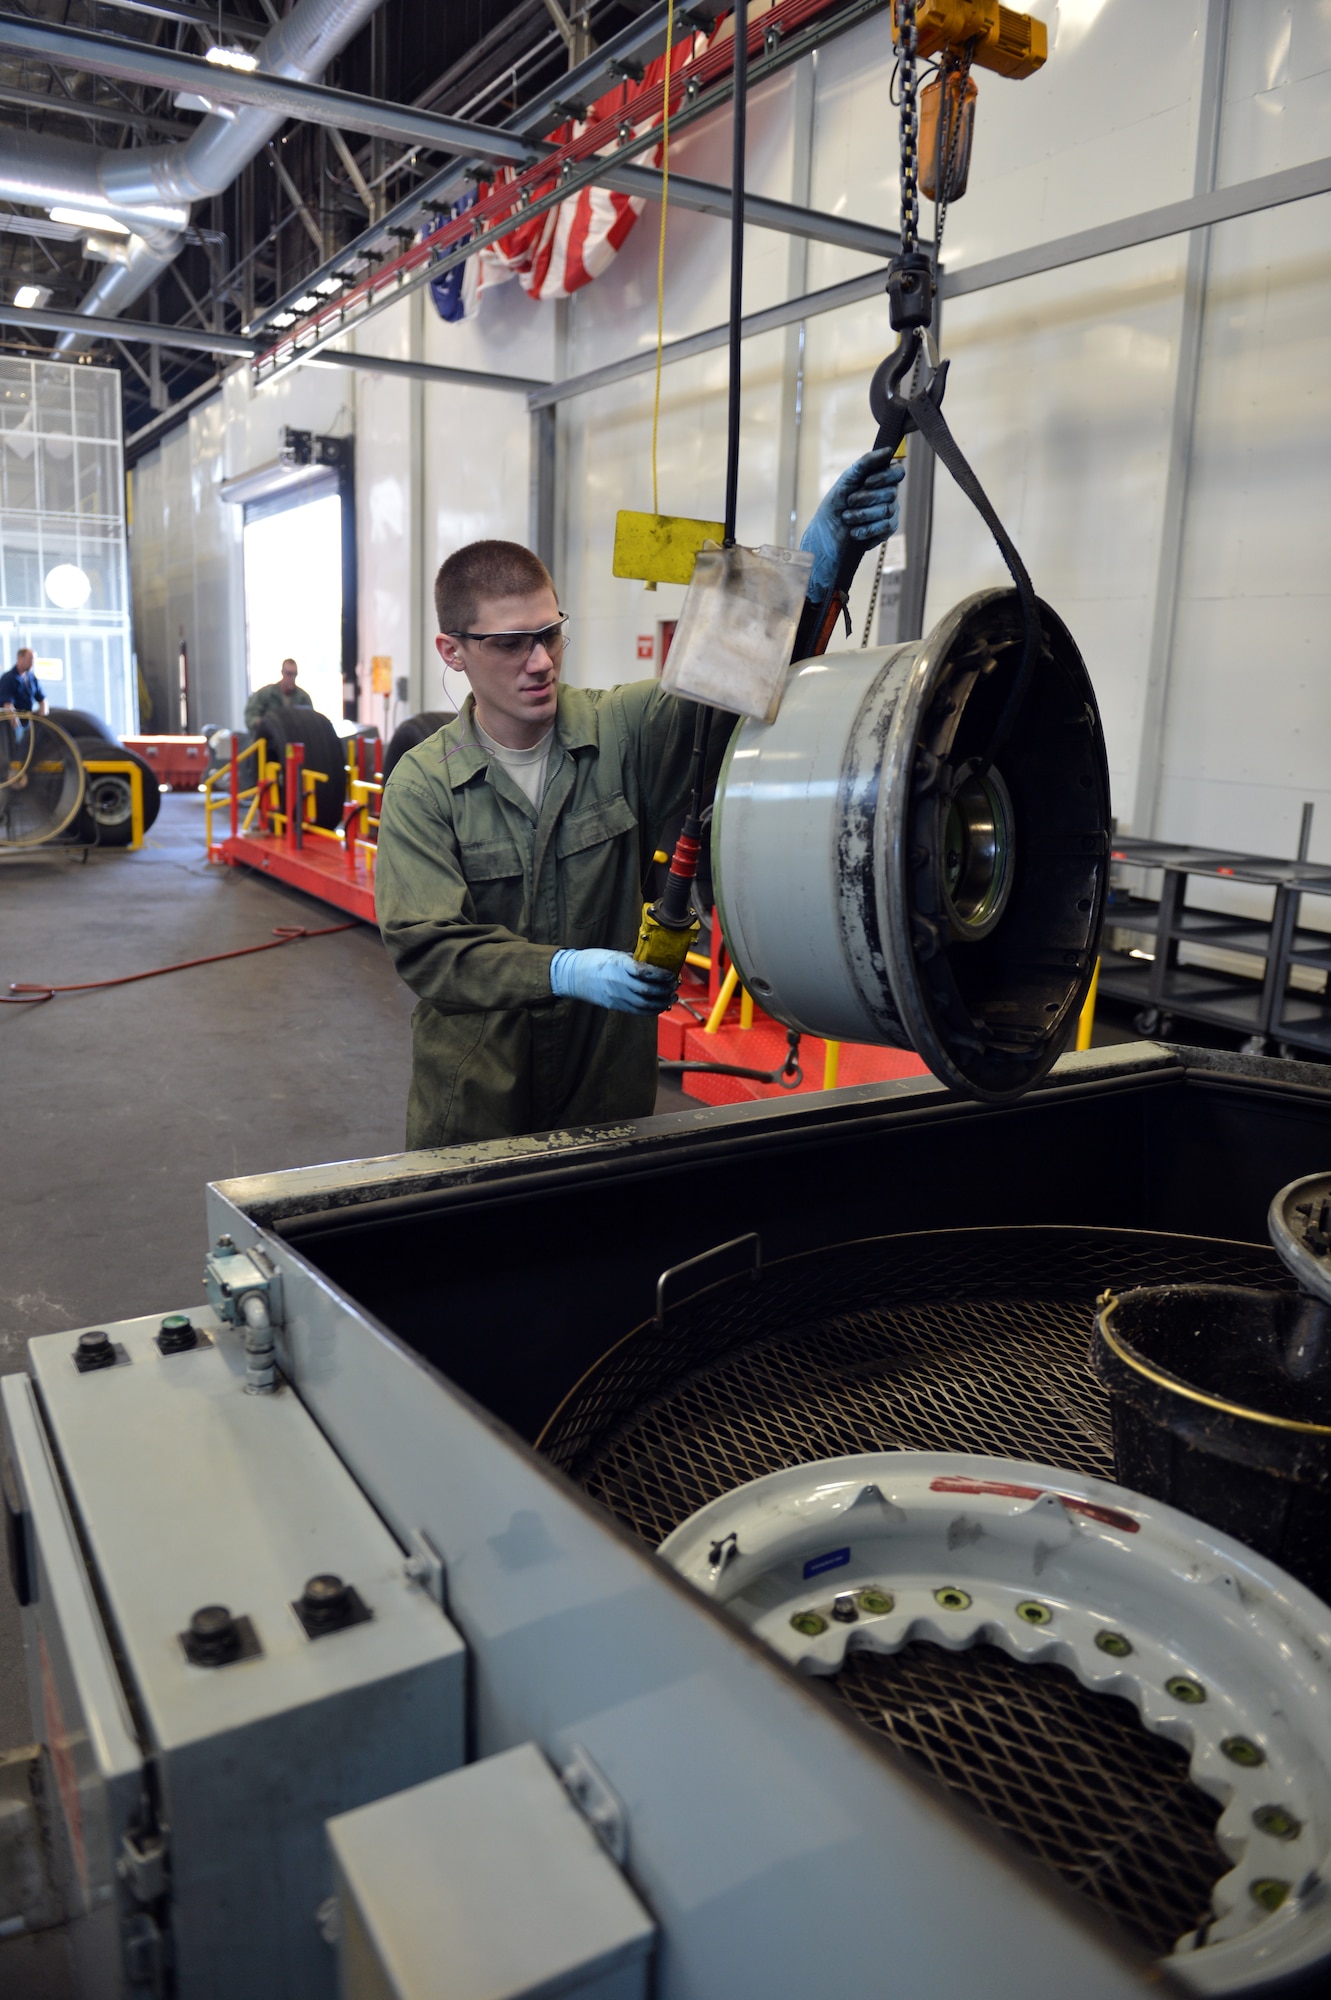 Staff Sgt. Christopher Hirsch, 62nd Maintenance Squadron aerospace maintenance journeyman, lowers a C-17 Globemaster III aircraft wheel assembly, which is a two-part design that weighs approximately 80-pounds, into the wheel washing machine Aug. 1, 2013 at Joint Base Lewis-McChord, Wash. The solvent in the washing machine breaks down the dirt and grime making it easier for technicians to scrub away the debris. (U.S. Air Force photo/Staff Sgt. Jason Truskowski)